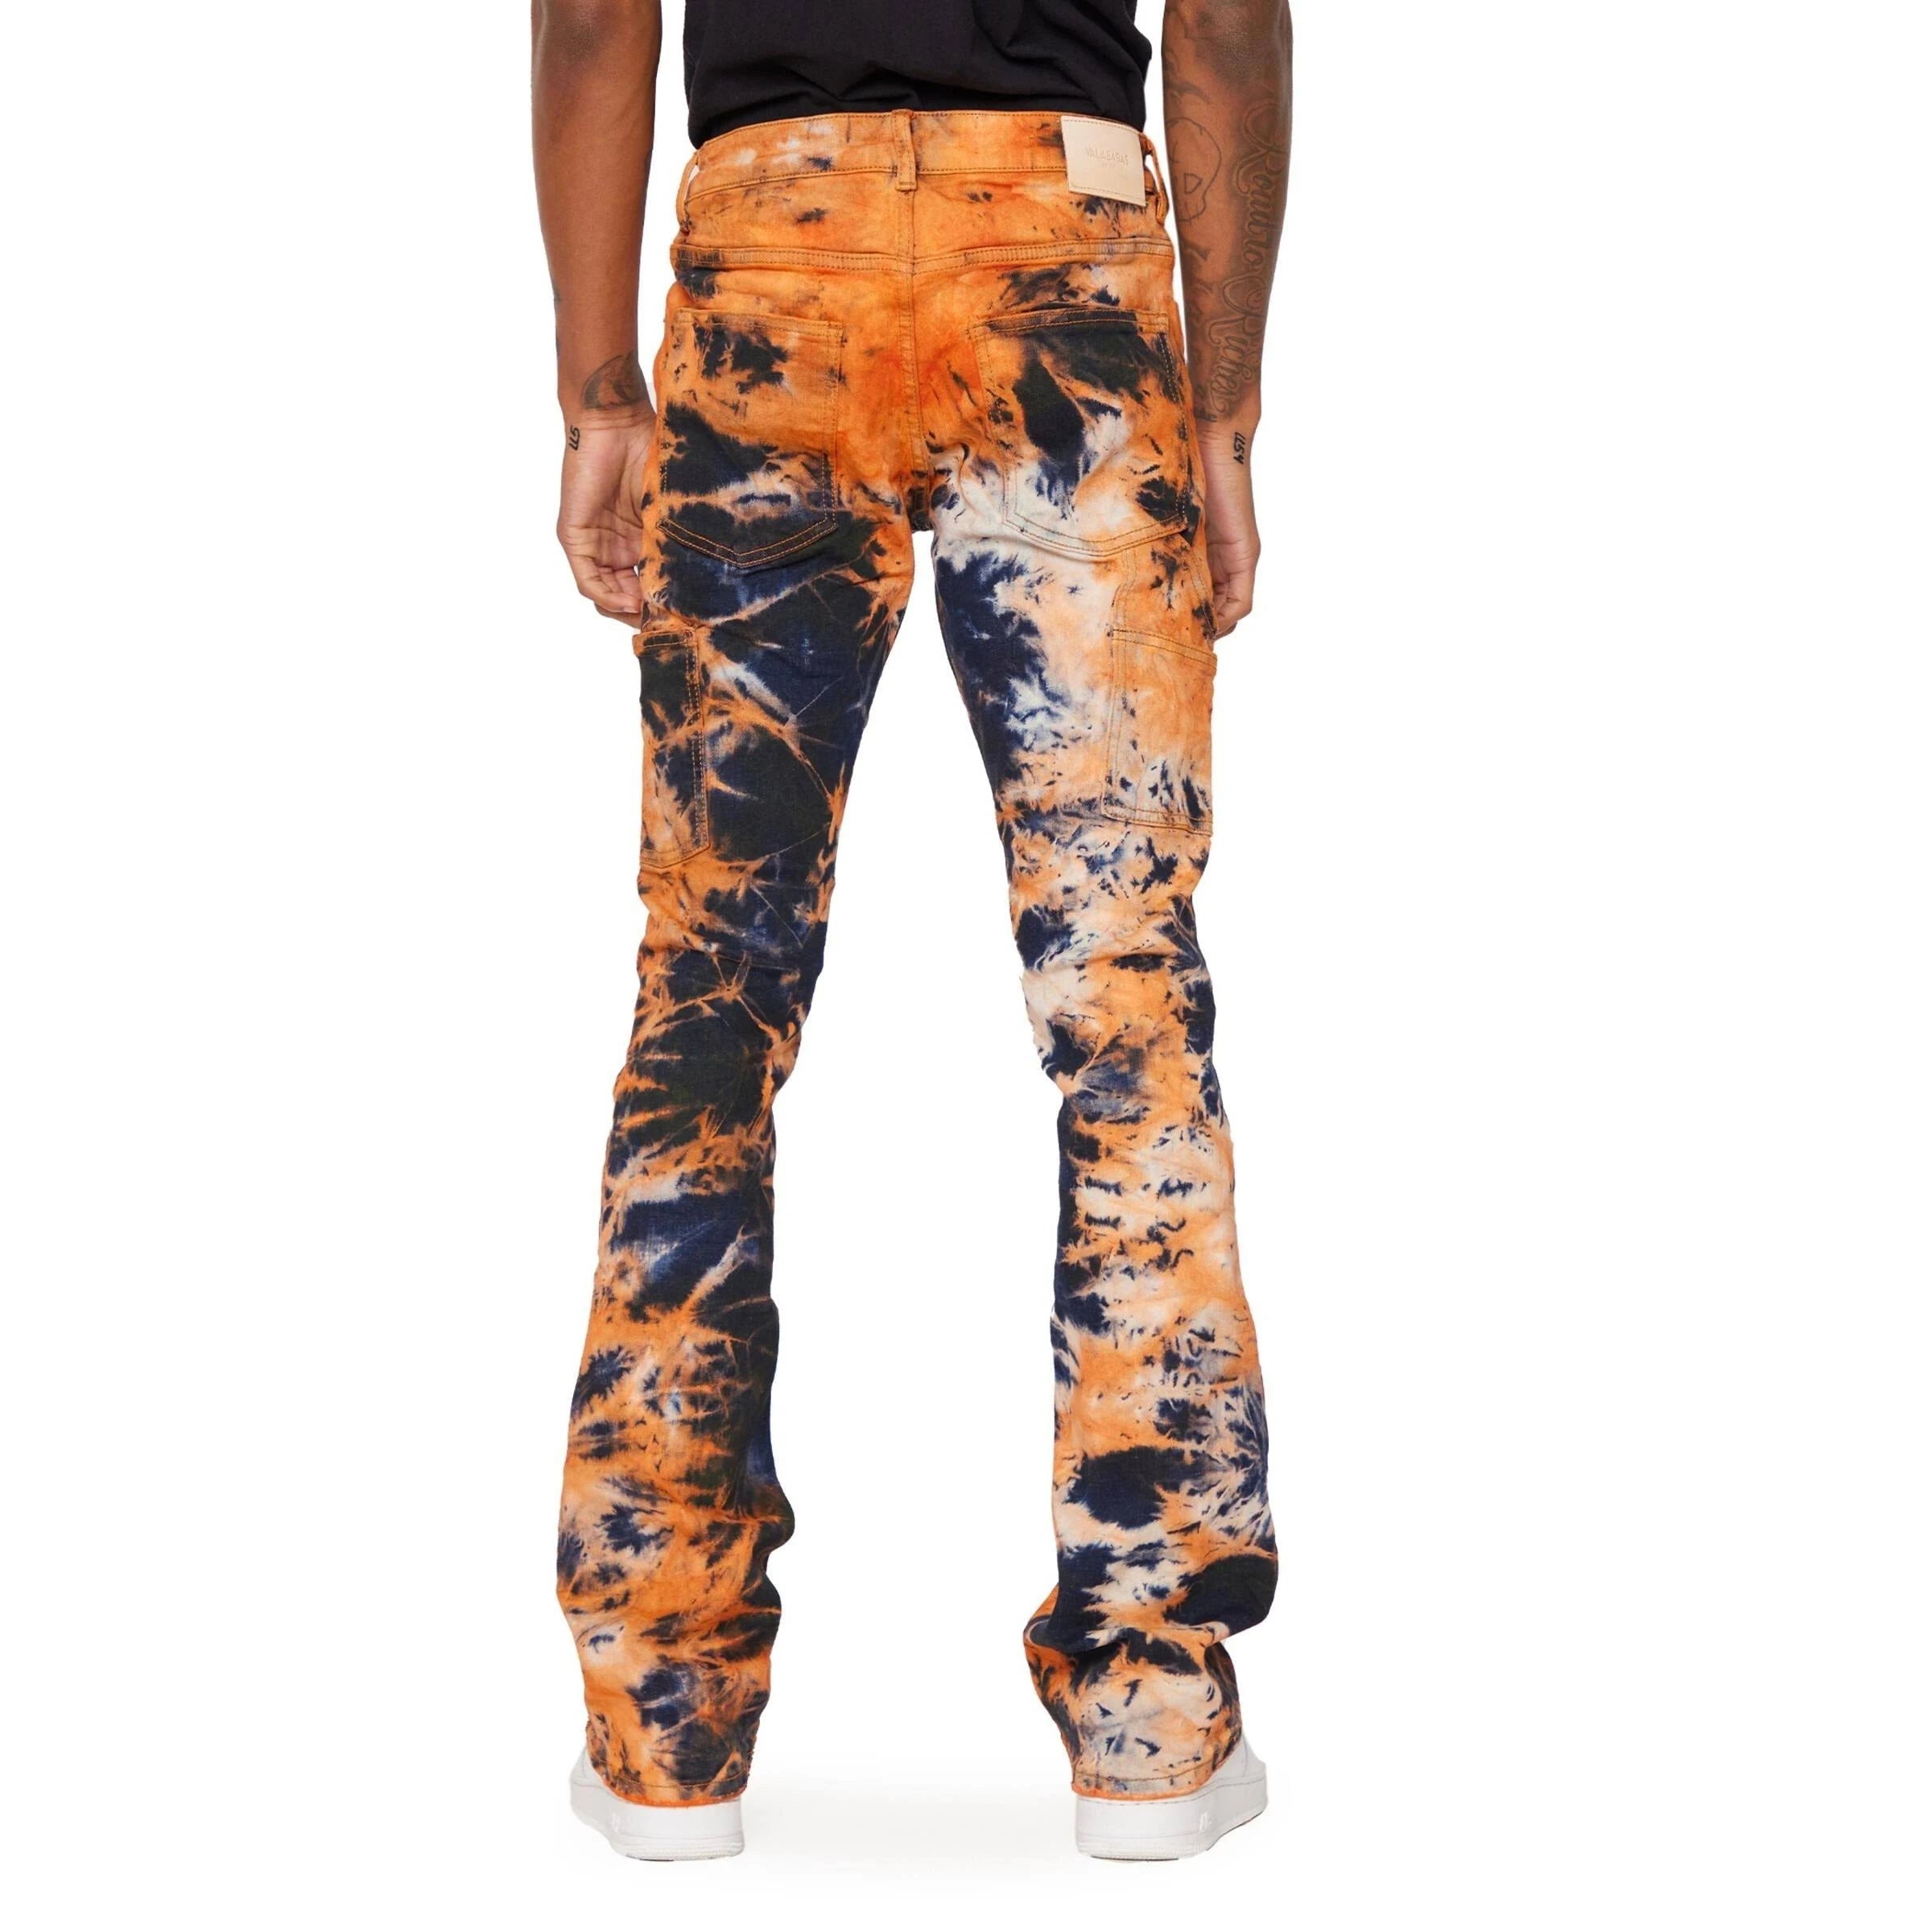 Orange & Blue “SIPRAL GALAXY" is featured in our signature Wide leg Stacked jeans construction with stretch